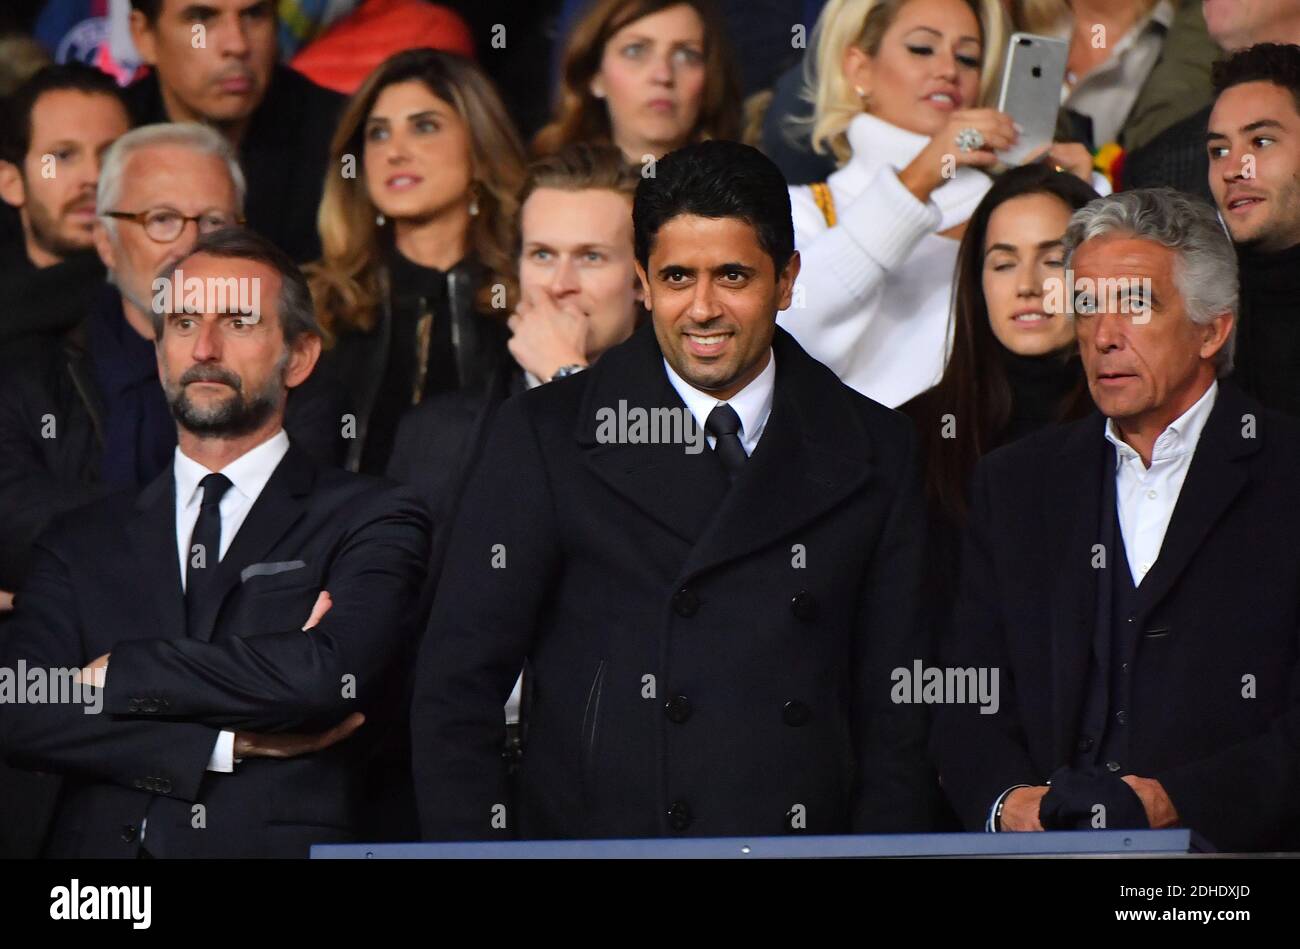 Nasser Al-Khelaifi and Jean-Pierre Riviere during the French First League  soccer match, PSG vs Nice on October 27, 2017, at the Parc des Princes  stadium in Paris, France. Photo by Christian Liewig/ABACAPRESS.COM